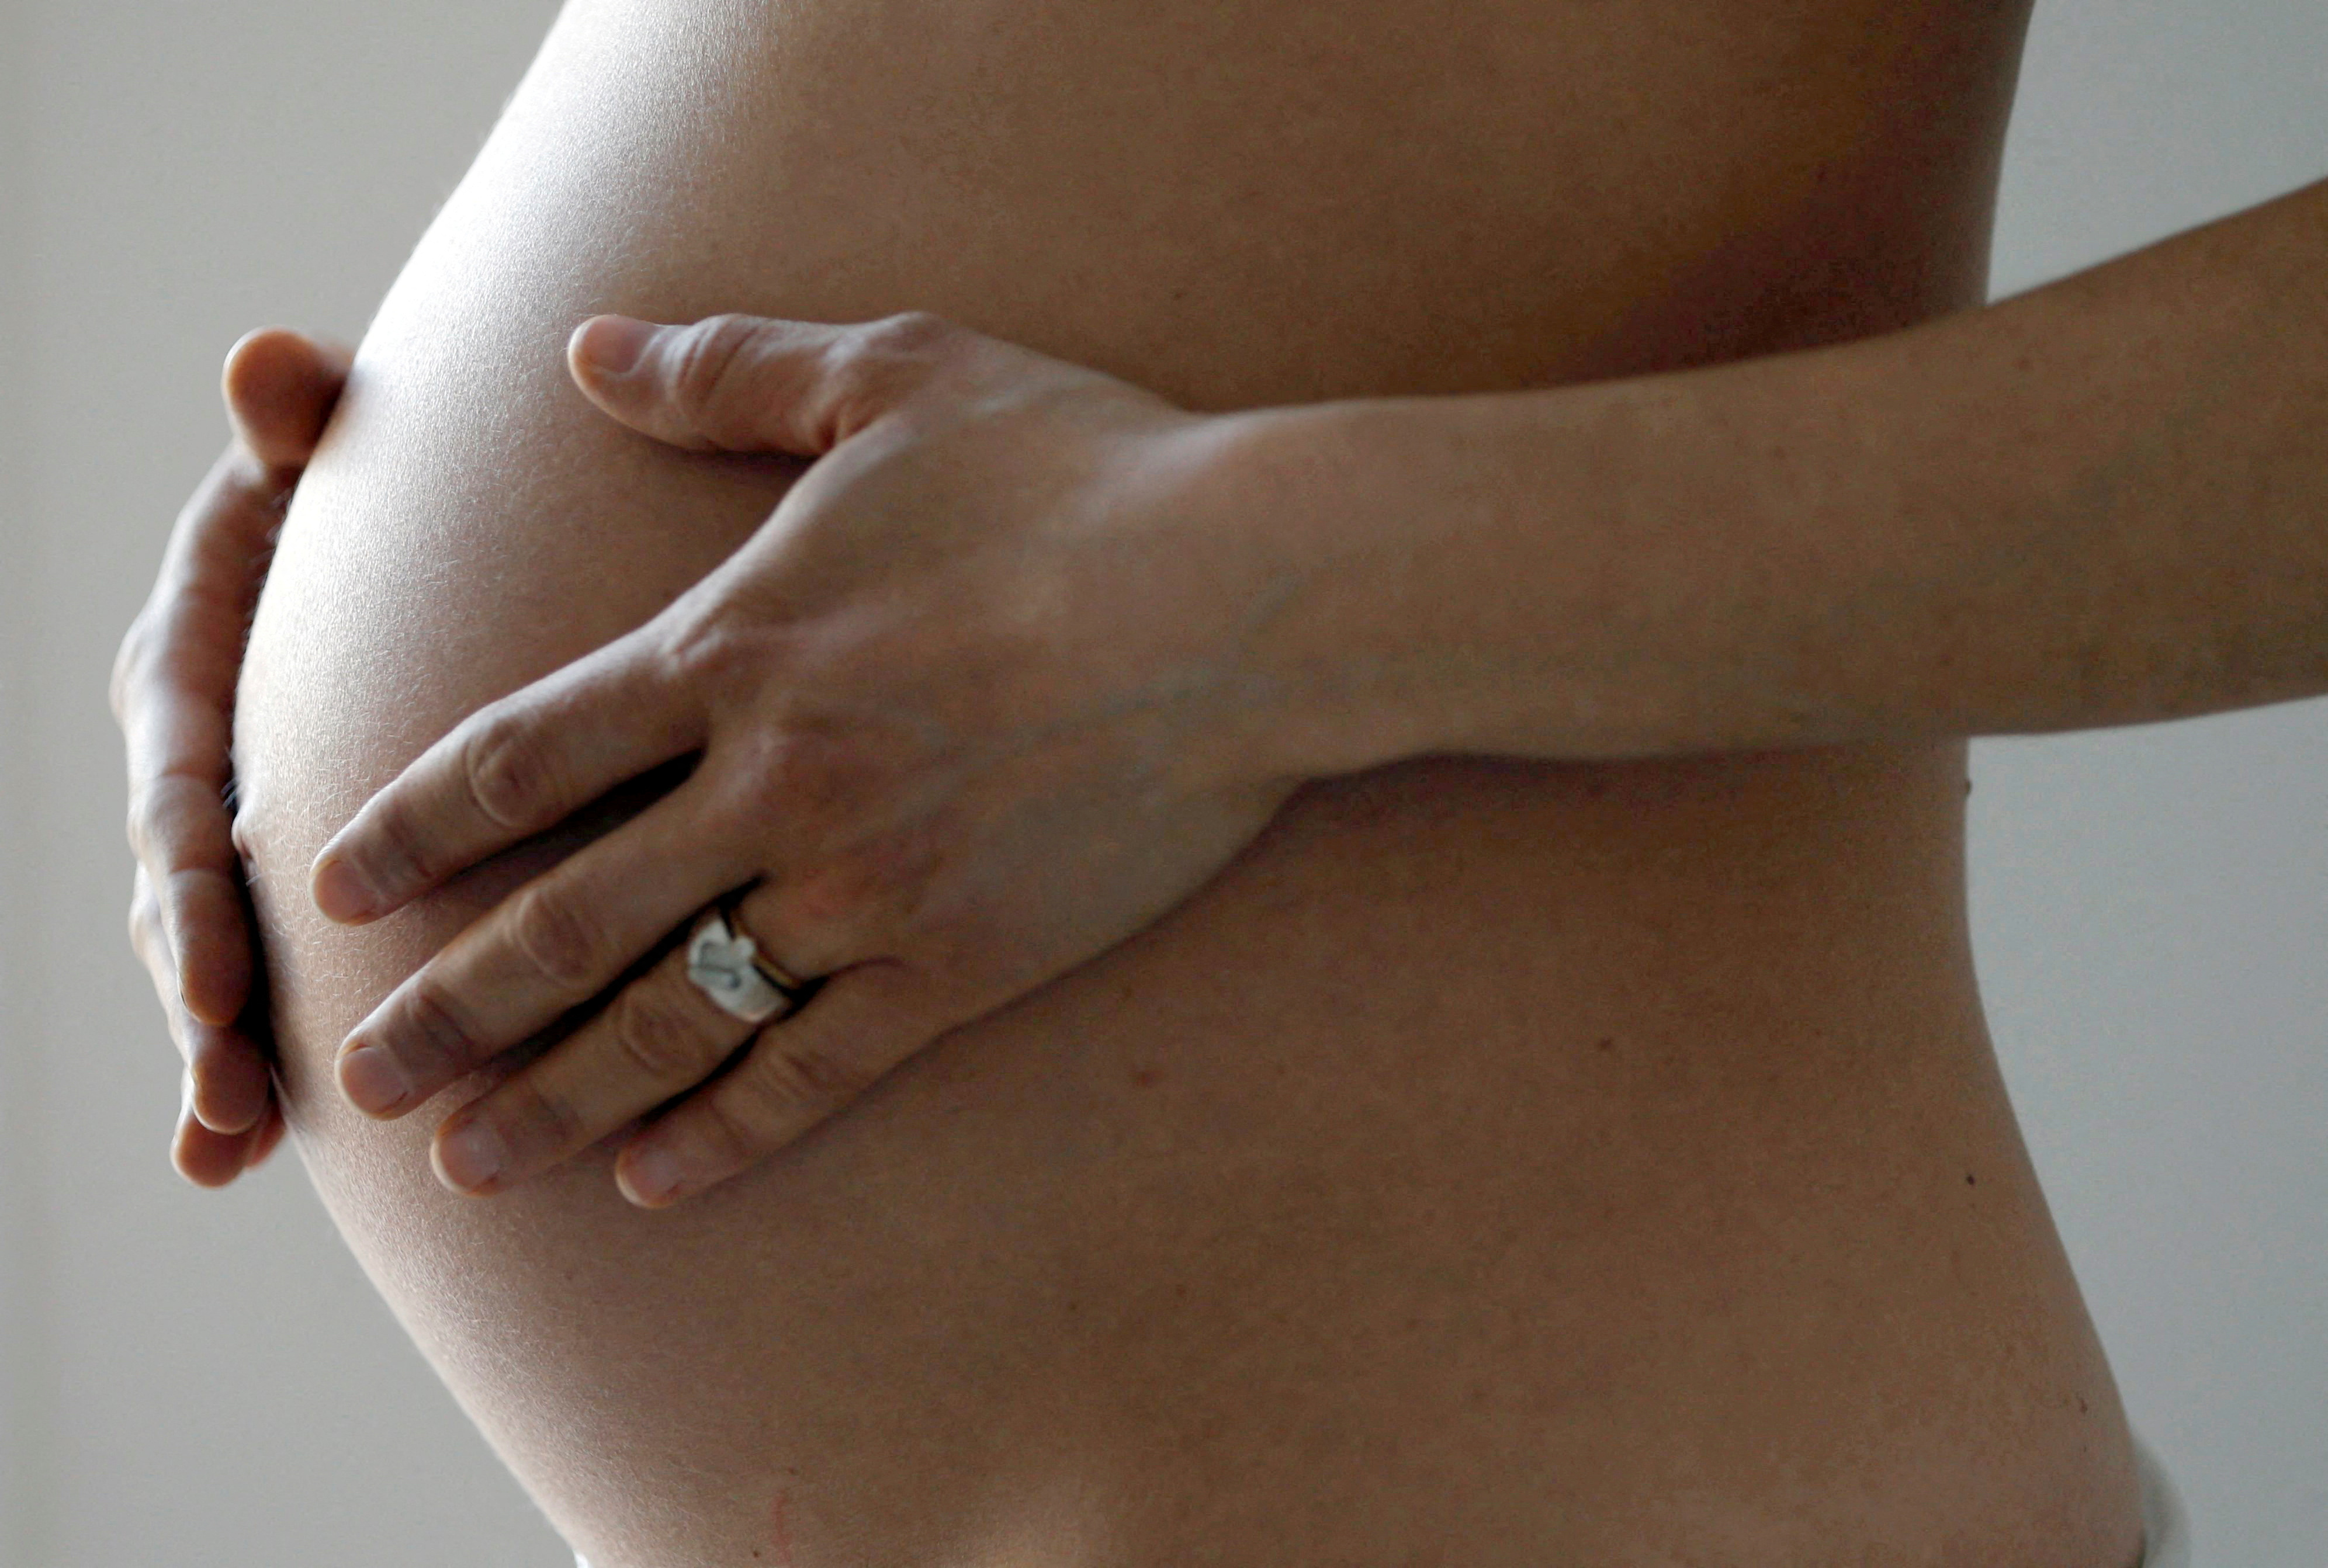 A pregnant woman, in the last trimester of her pregnancy, poses in this illustration photo in Sete